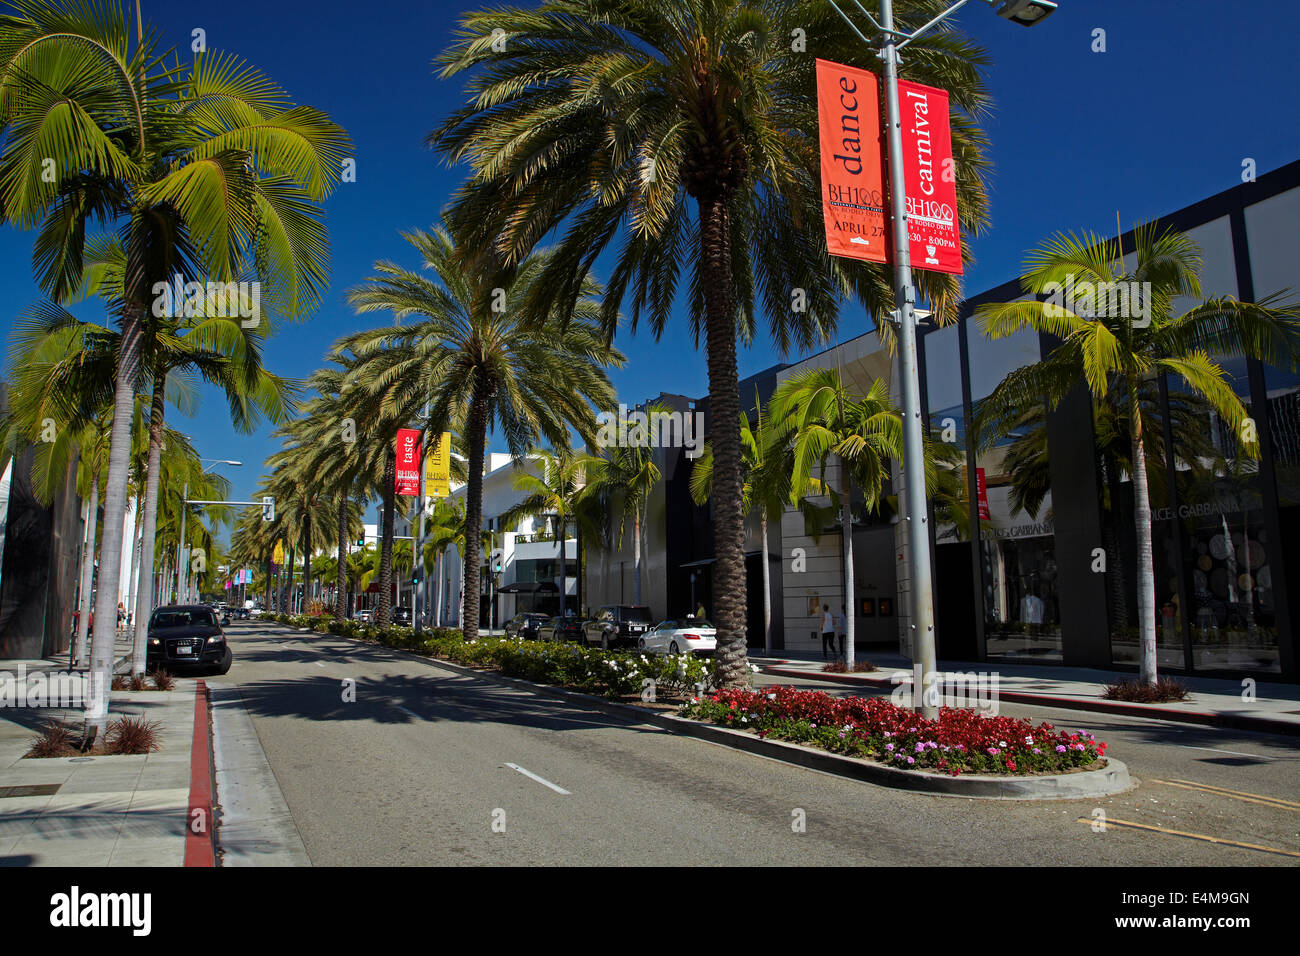 Palm trees on Rodeo Drive, luxury shopping street in Beverly Hills, Los Angeles, California, USA Stock Photo